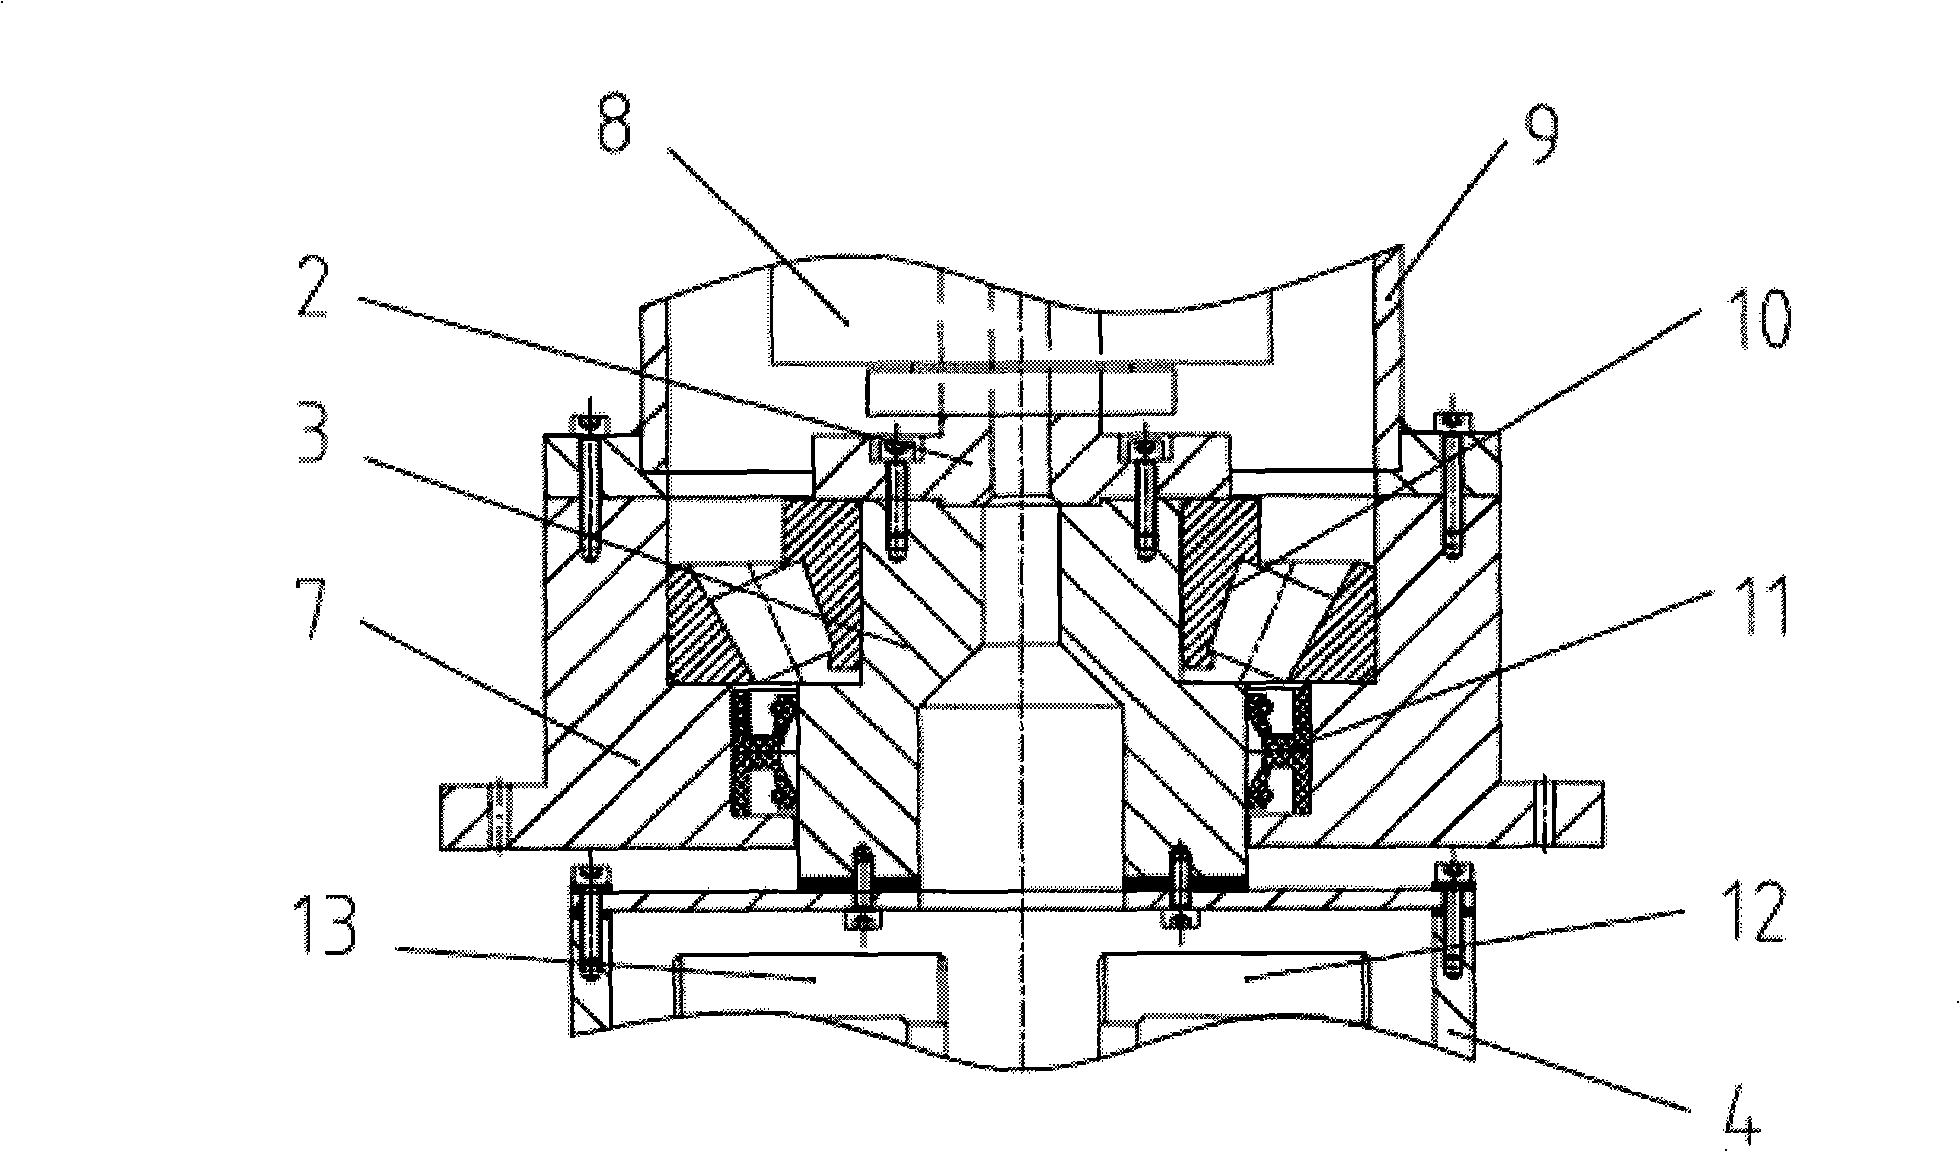 Straight wing cycloid thruster with stepping motor as controlling mechanism